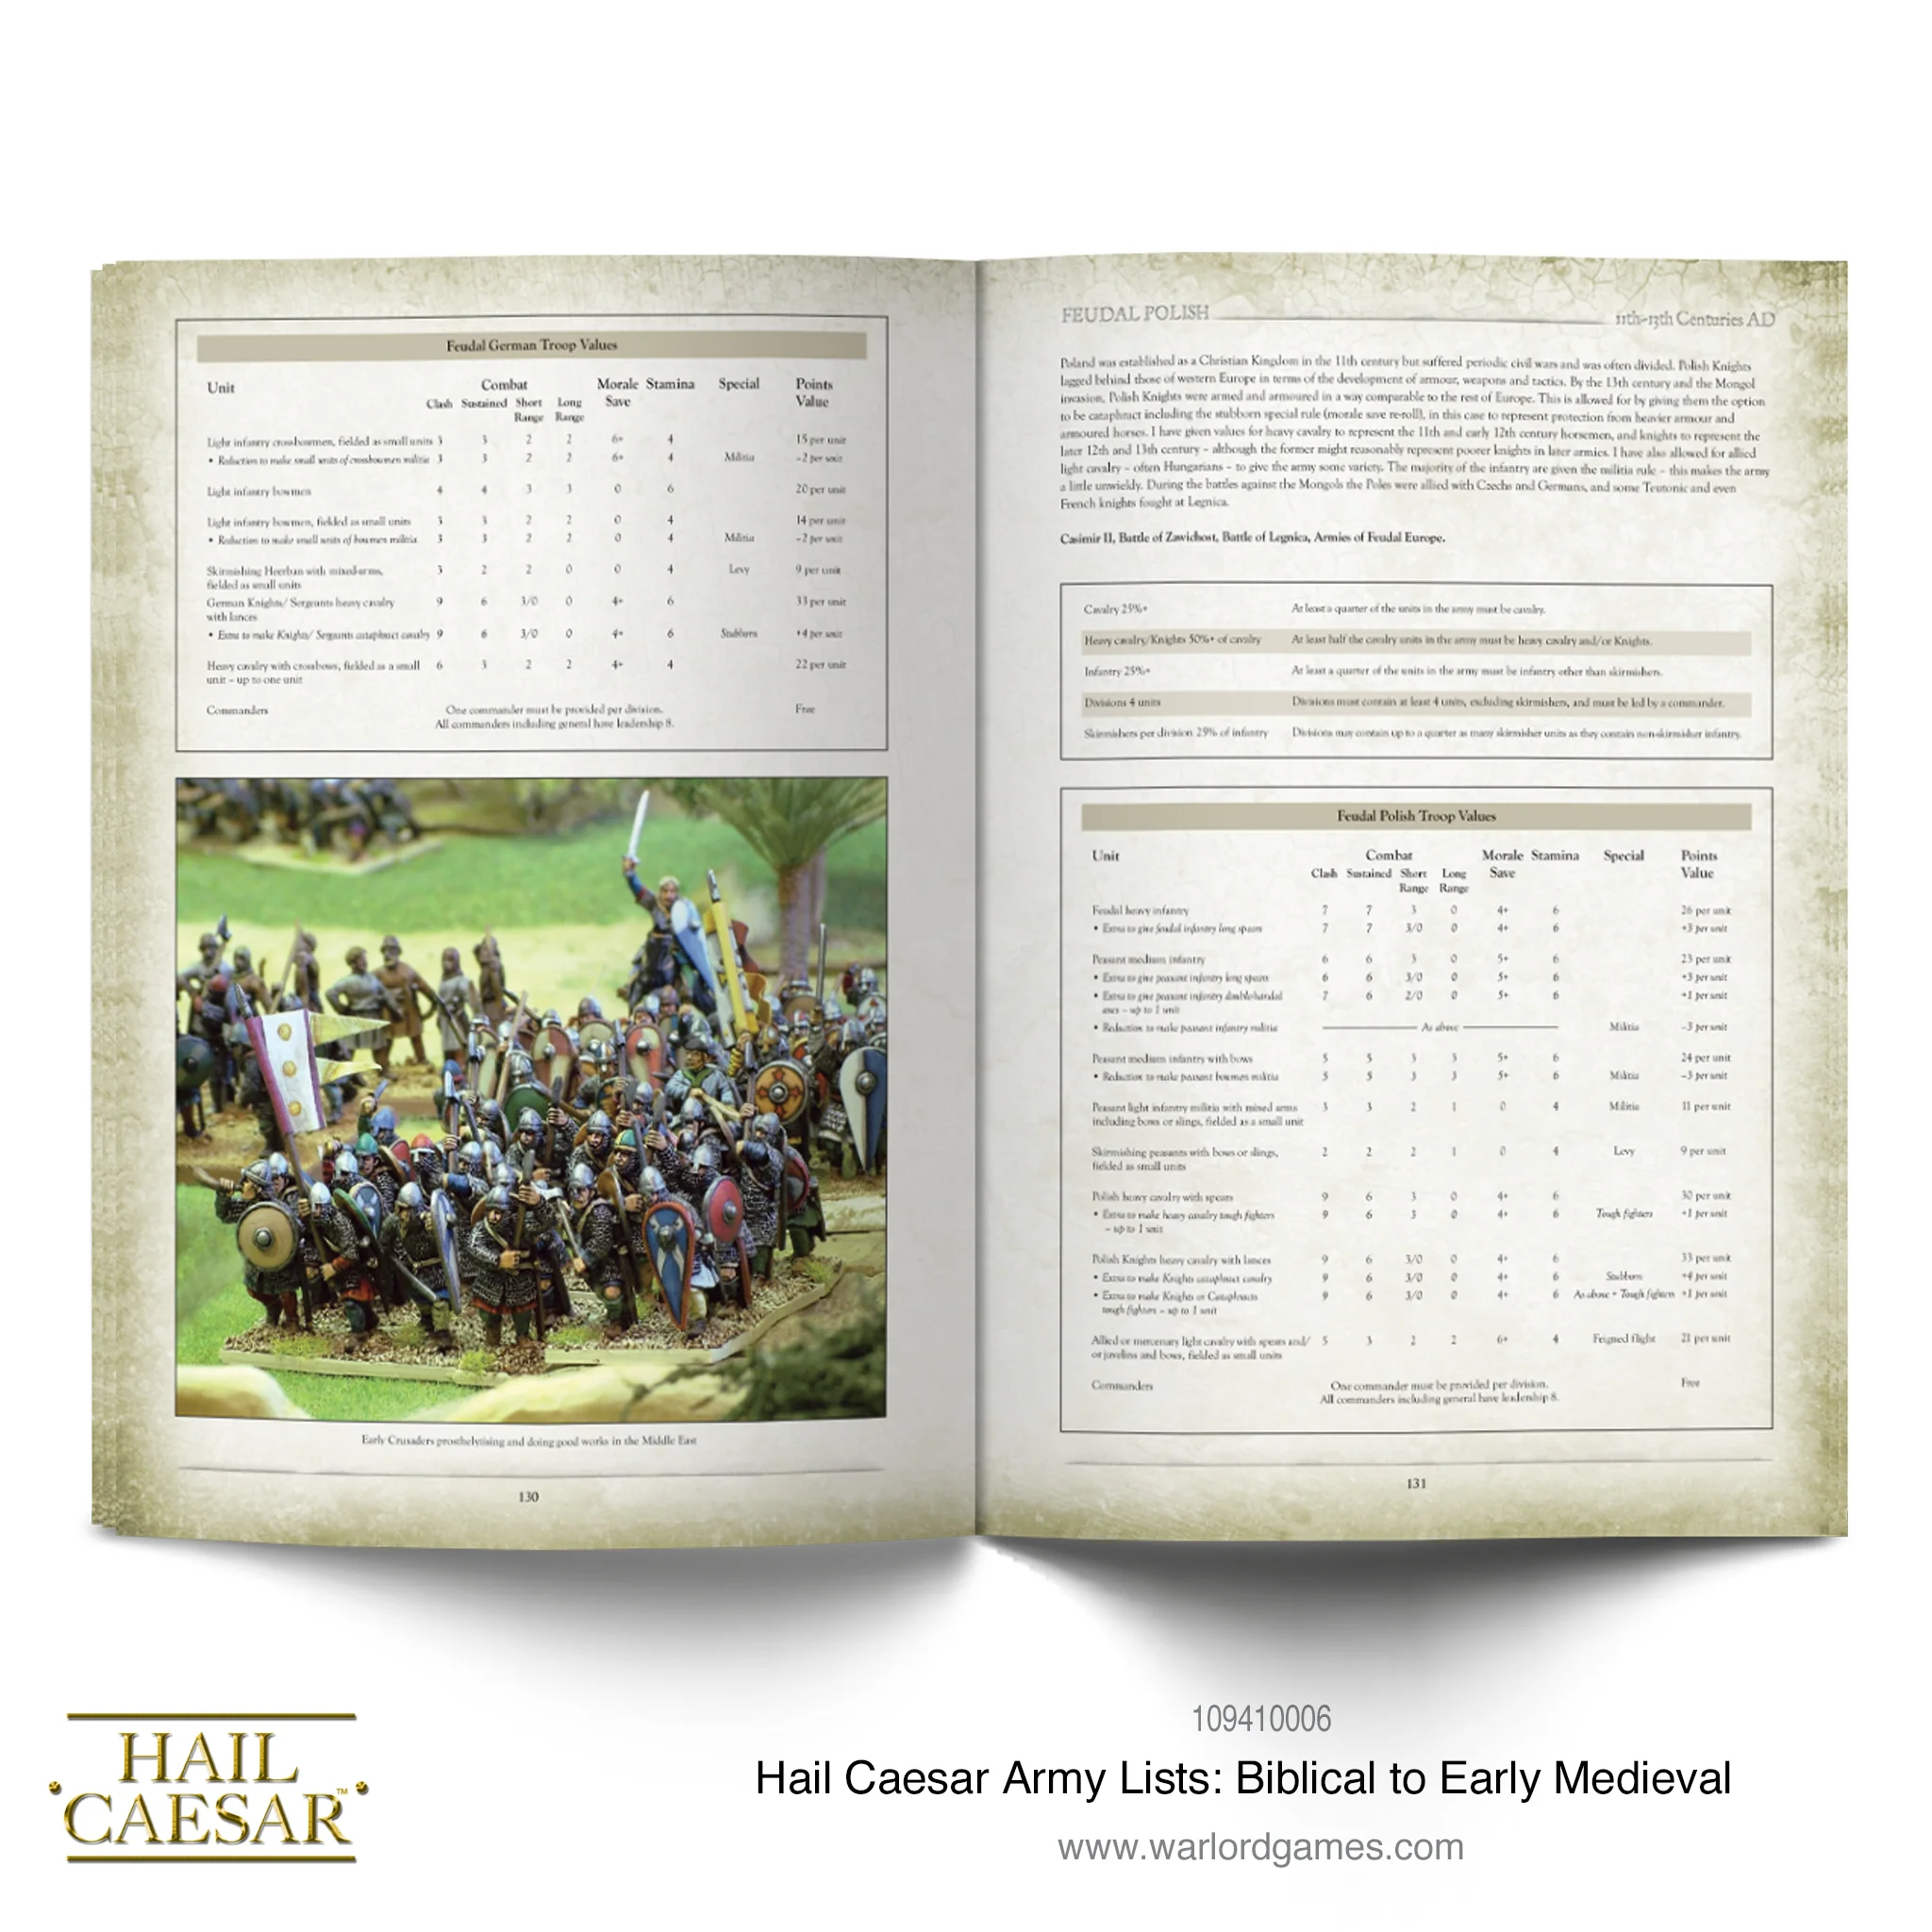 Hail Caesar Army Lists - Biblical To Early Medieval-1711128894-PHlwc.webp